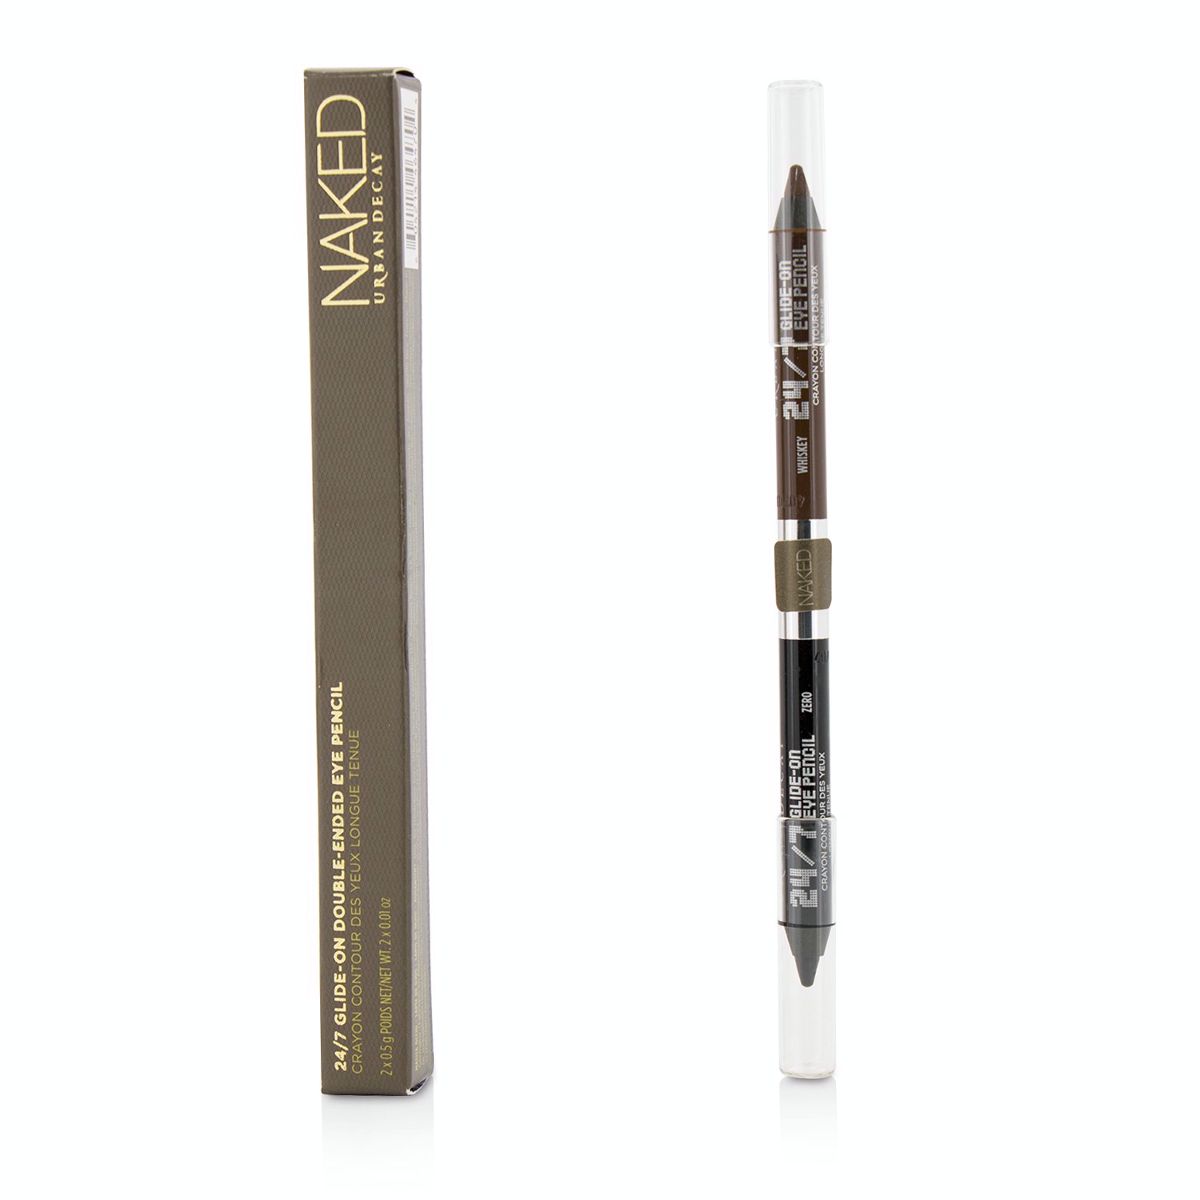 24/7 Glide On Double Ended Eye Pencil - Naked (Zero/Whiskey) Urban Decay Image